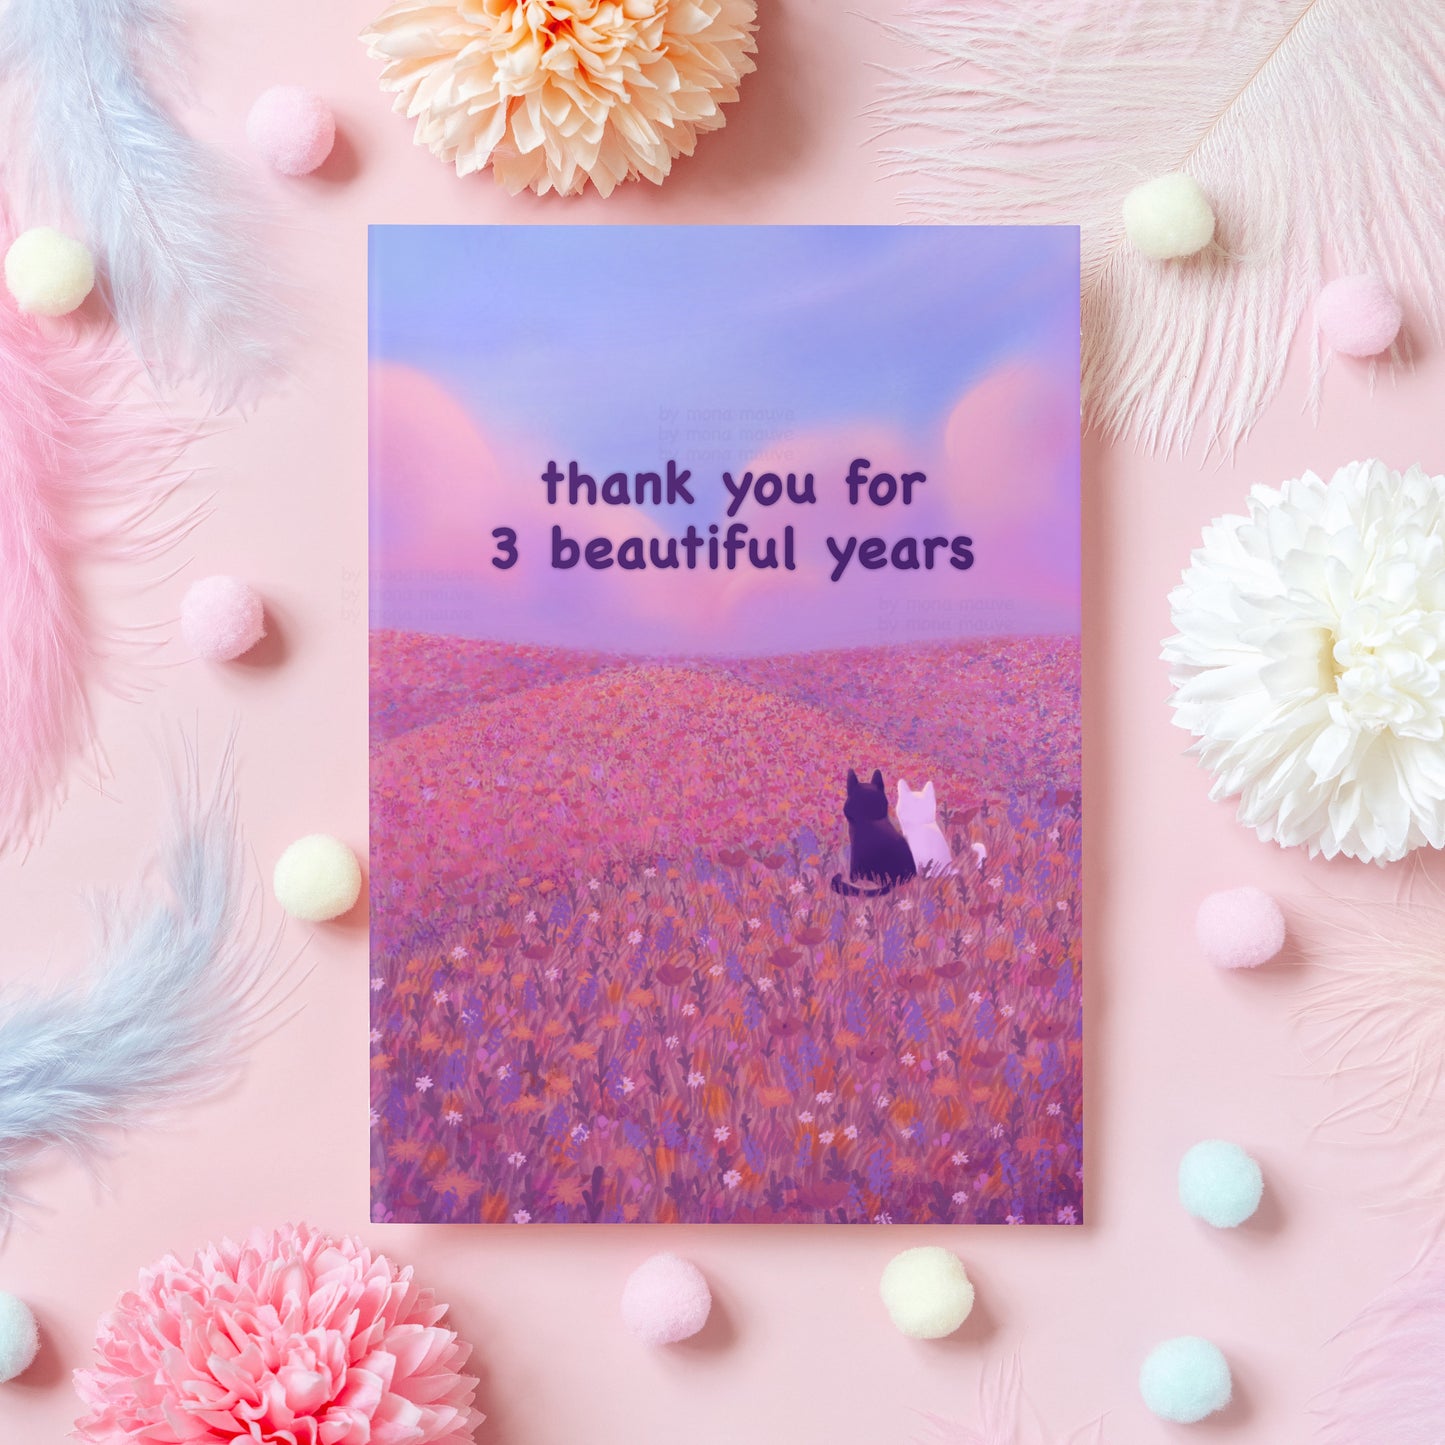 Cute Third Anniversary Card | Thank You for 3 Beautiful Years